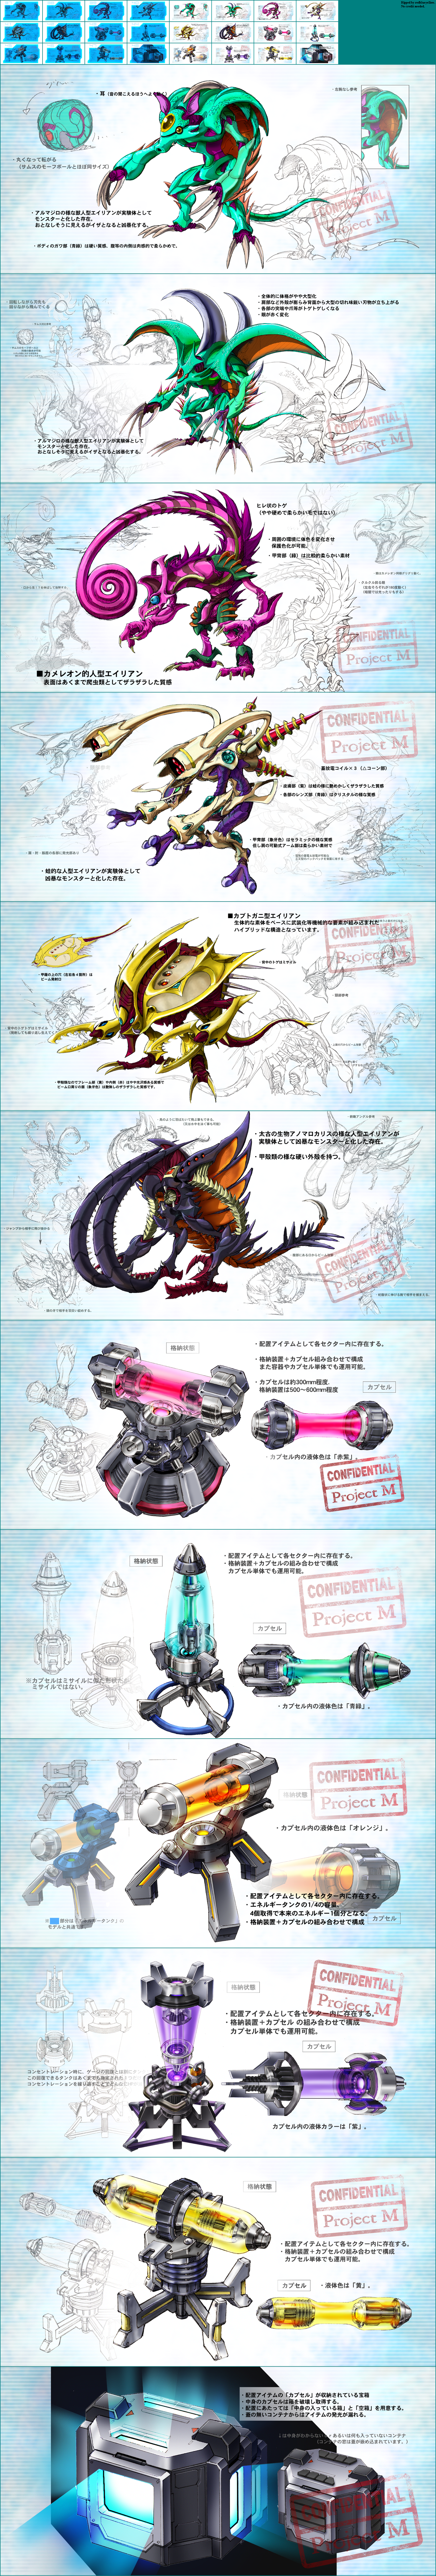 Metroid: Other M - Gallery (Page 4)